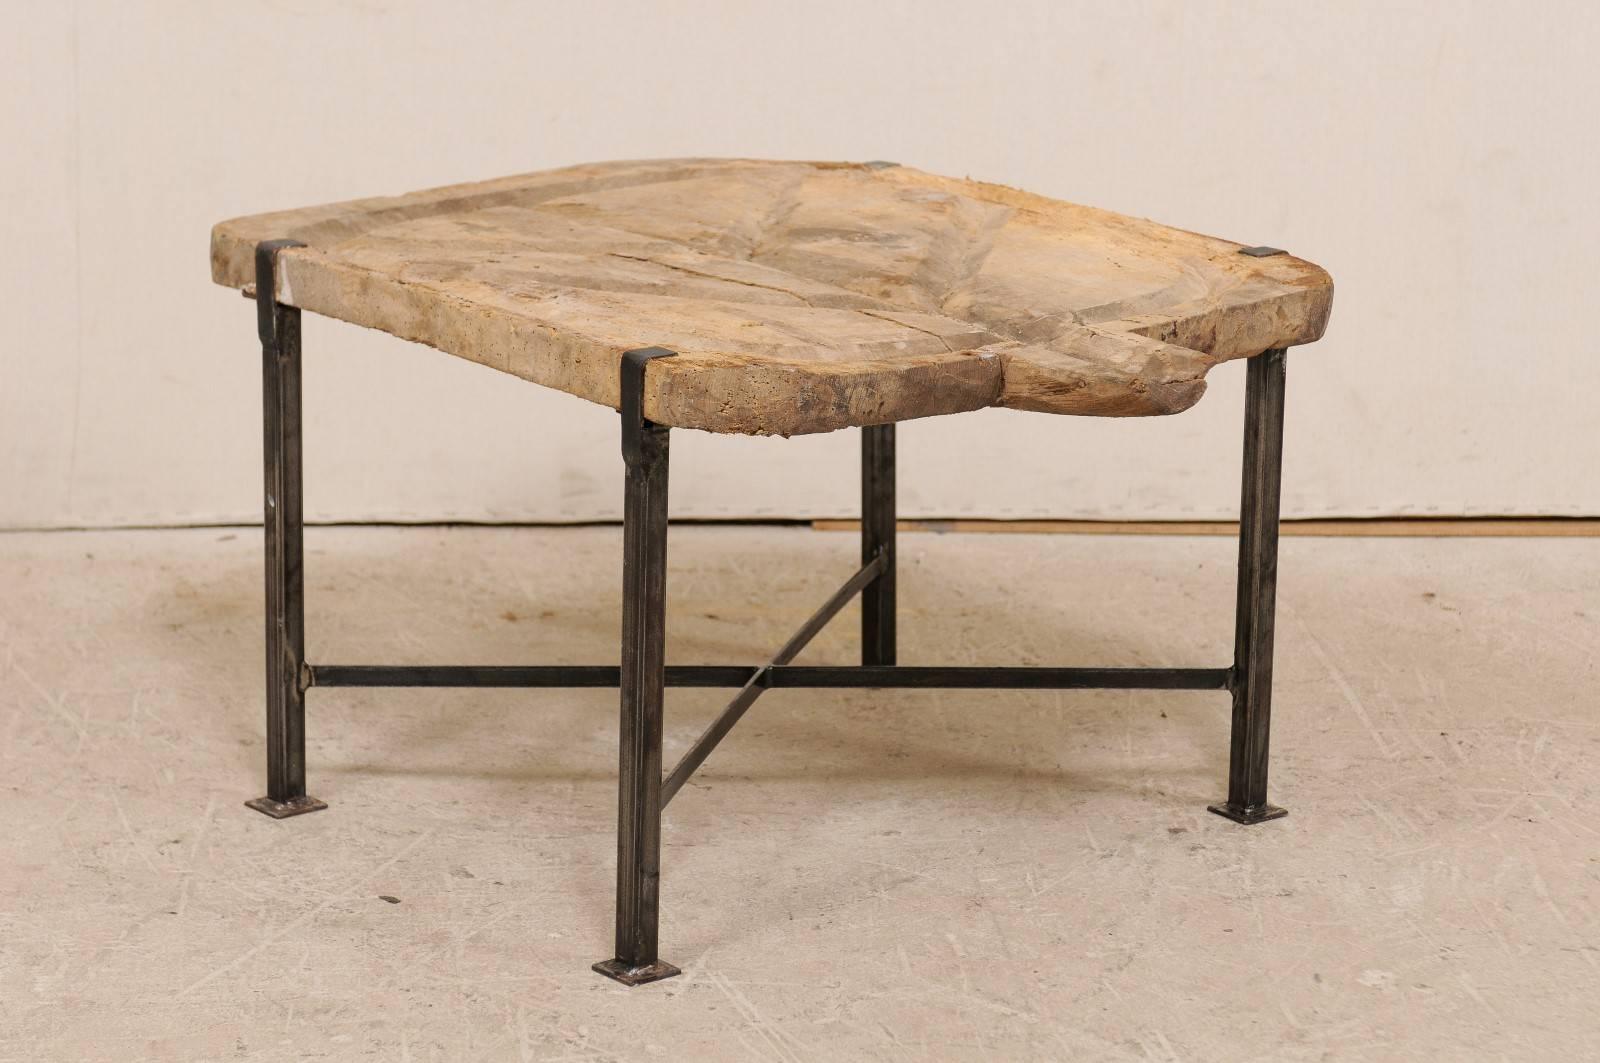 A custom Spanish wood and iron table. This coffee table has been fashioned from a 19th century Spanish cheese board as it's top which has been raised on a newer custom iron base. This piece features a natural wood top which has been hand carved with